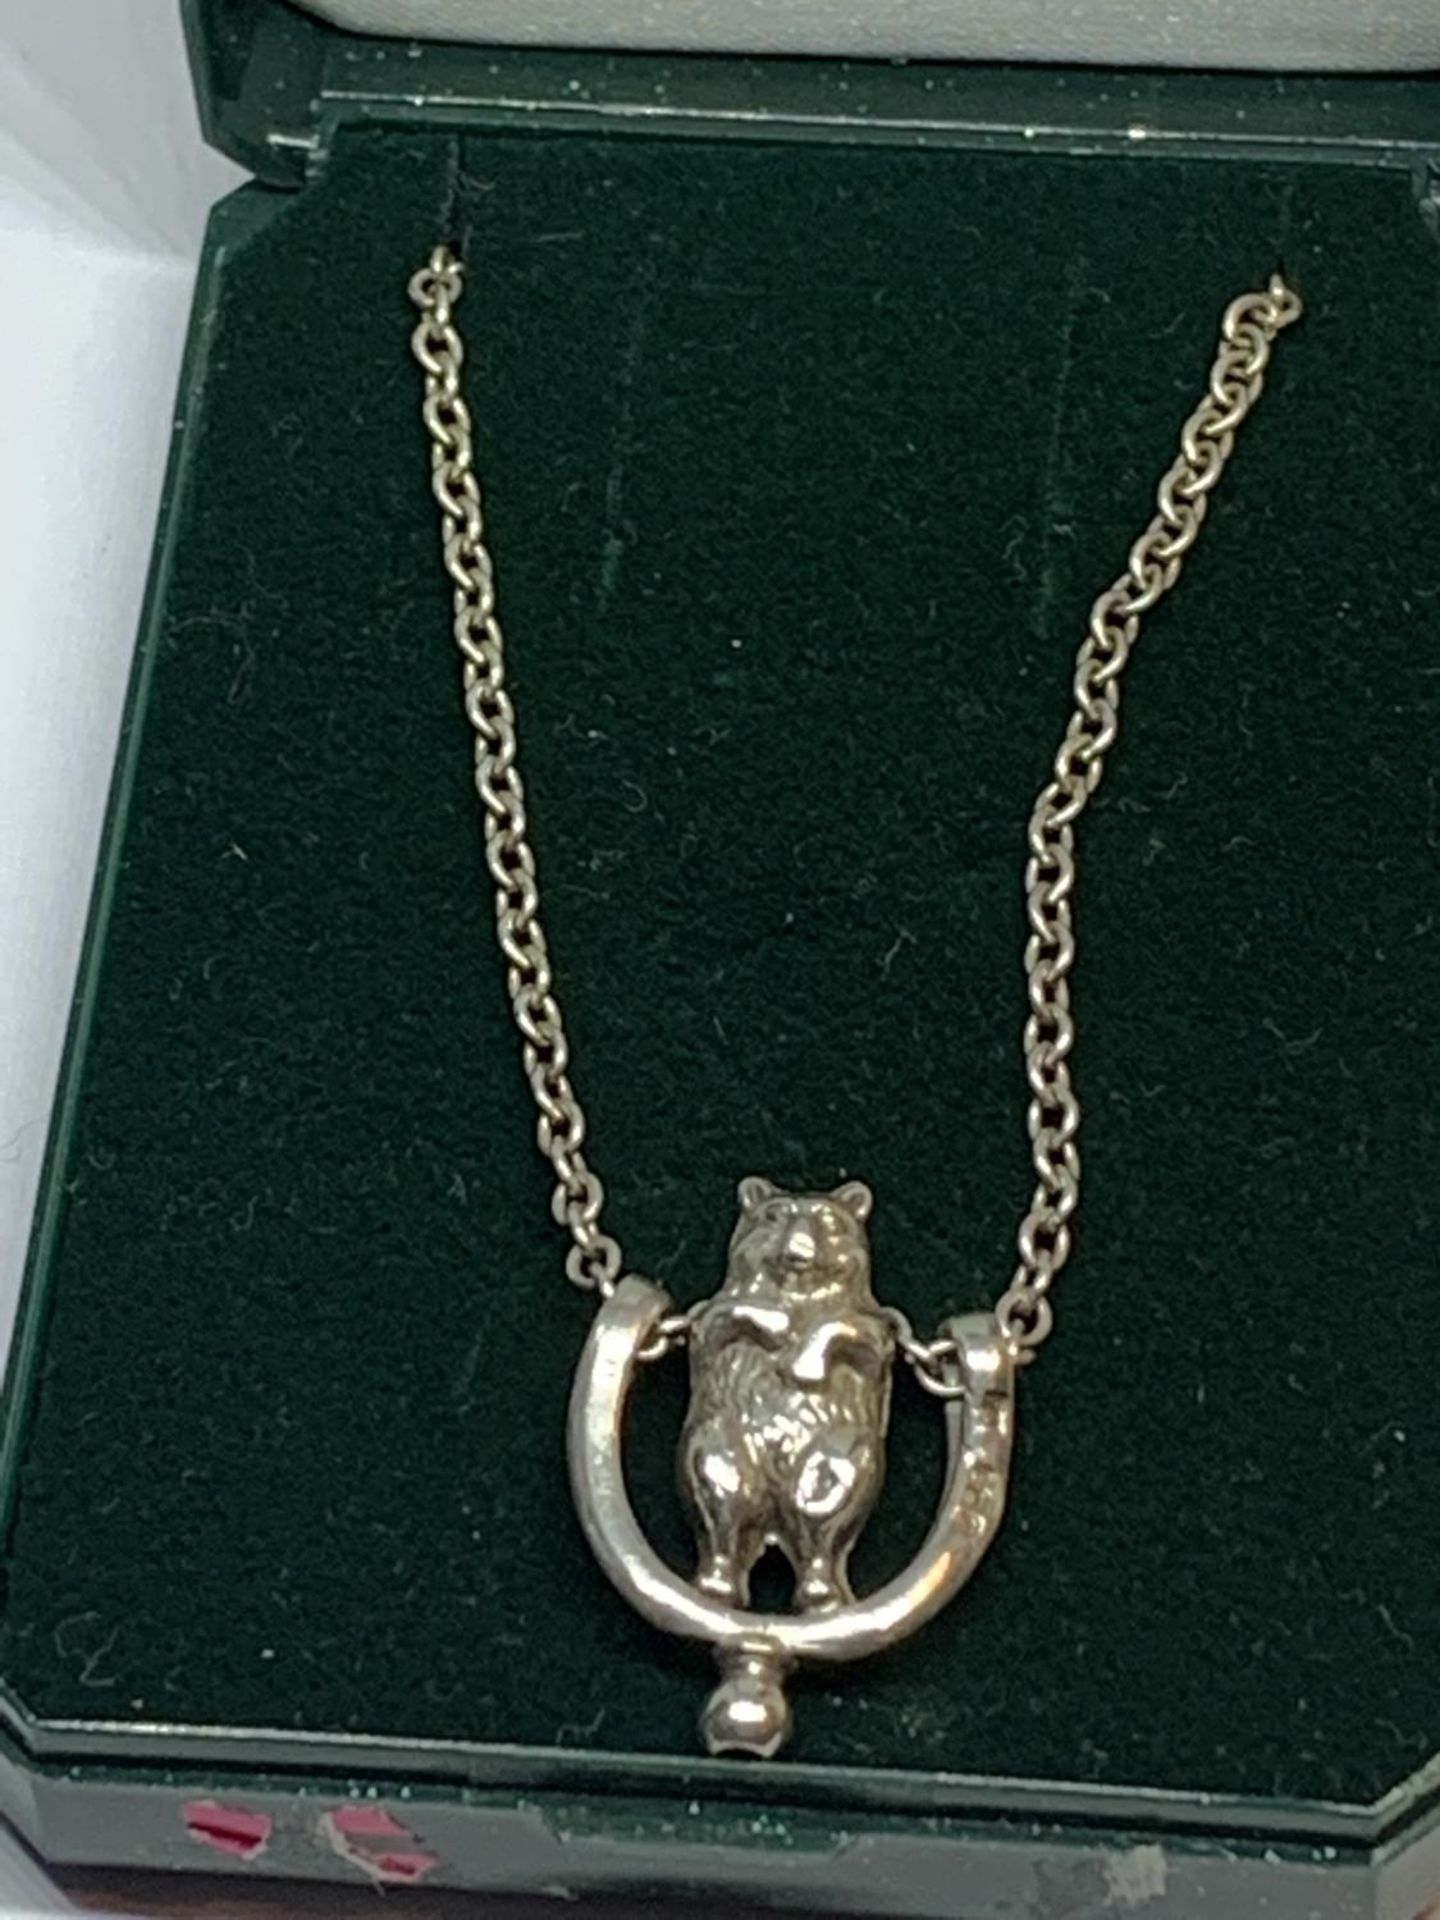 A SILVER NECKLACE WITH BEAR PENDANT IN A PRESENTATION BOX